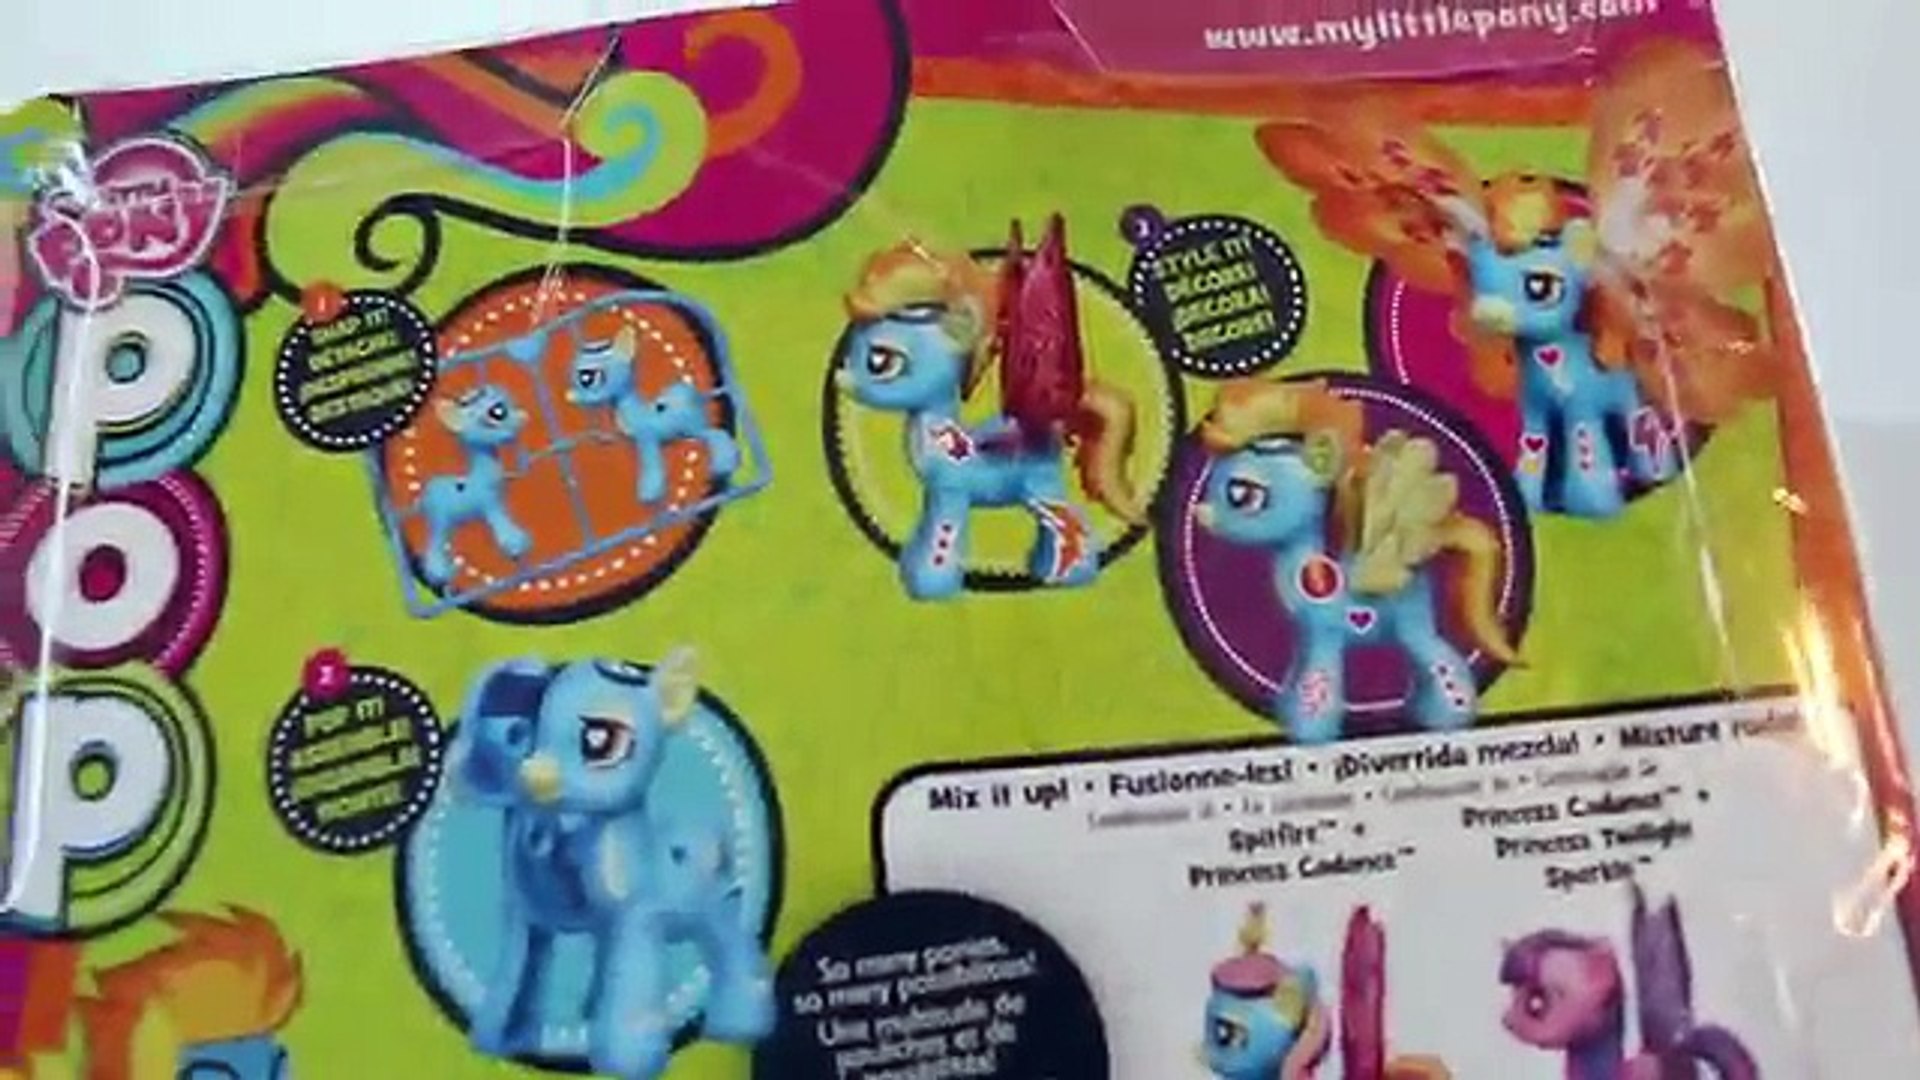 My Little Pony Spitfire Pop Pony Collectible Unboxing Review